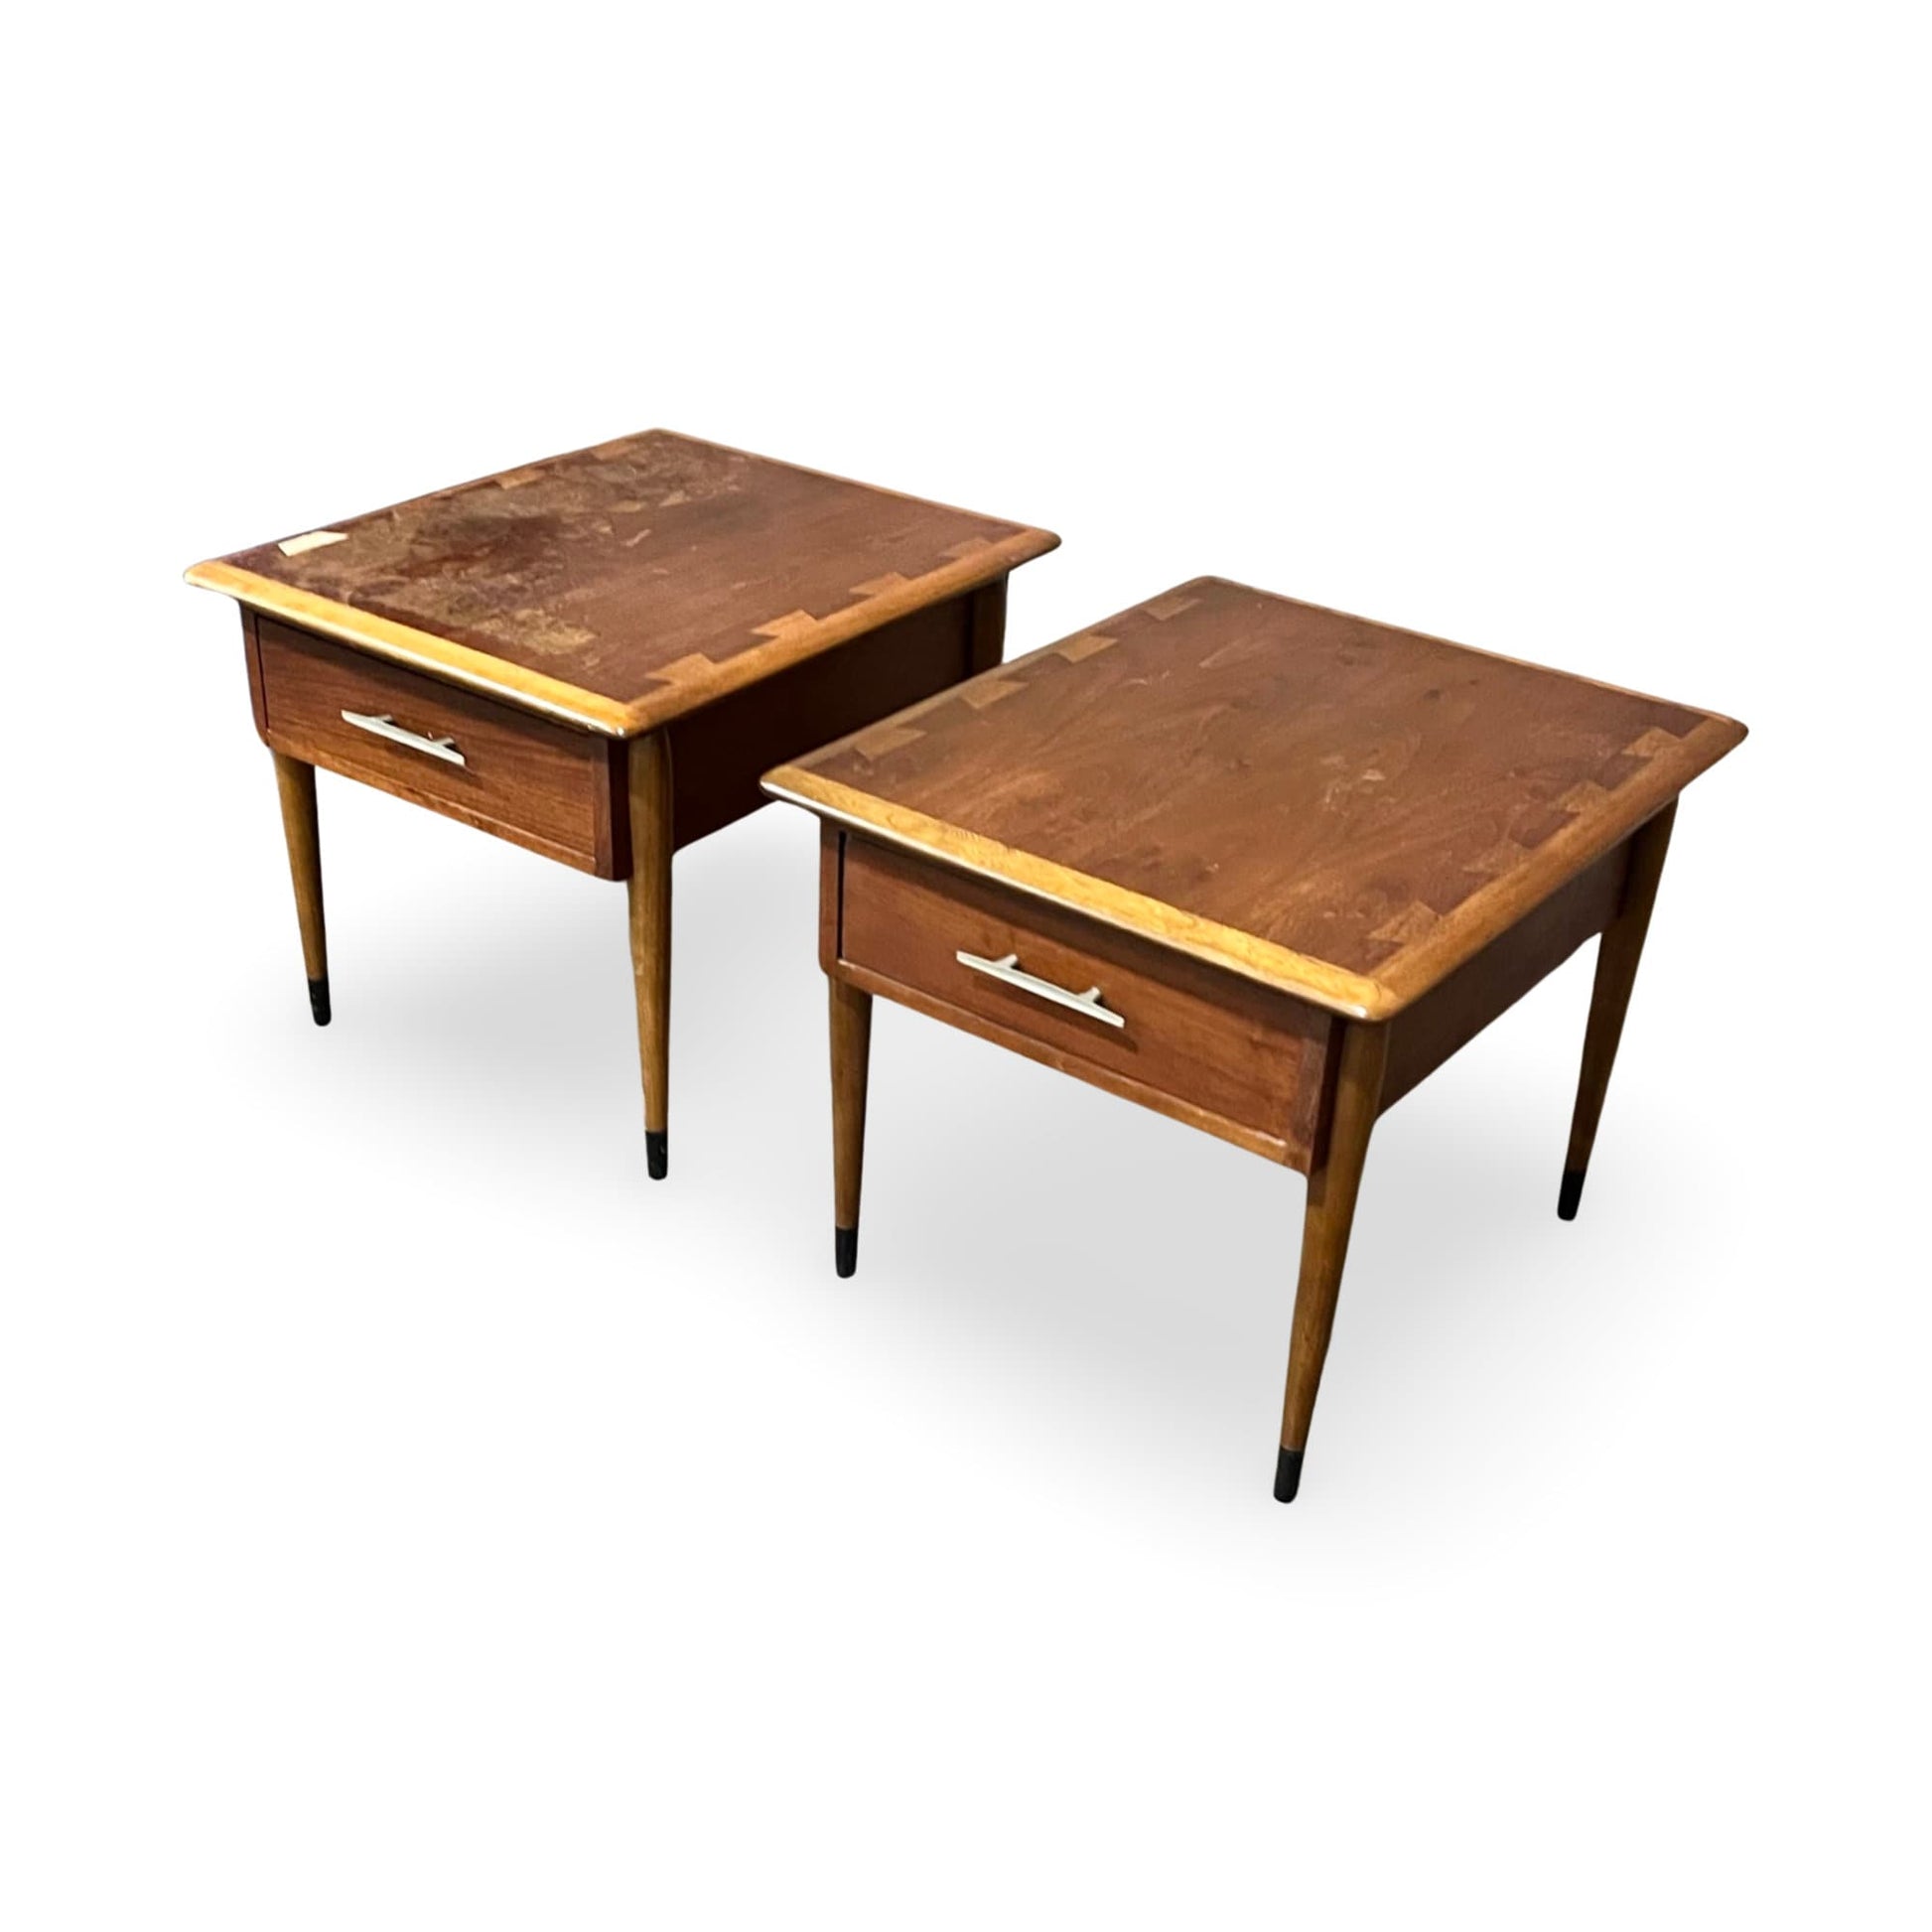 Functional and stylish 1960s end tables, ideal as sofa companions or nightstands.